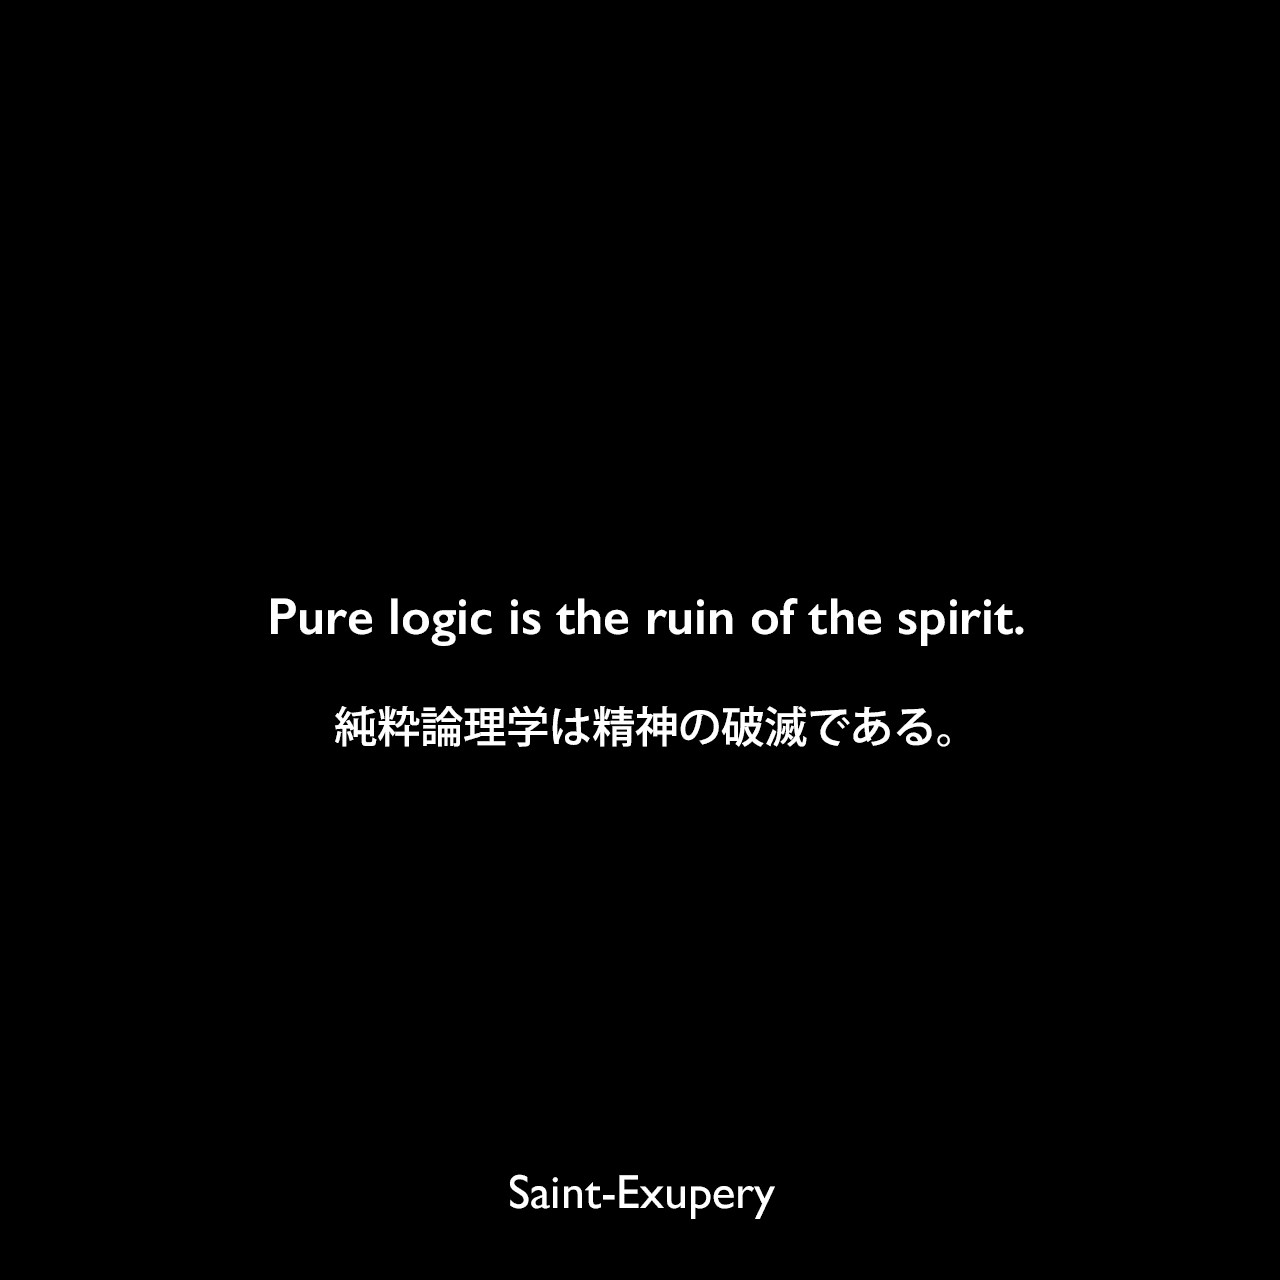 Pure logic is the ruin of the spirit.純粋論理学は精神の破滅である。Saint-Exupery